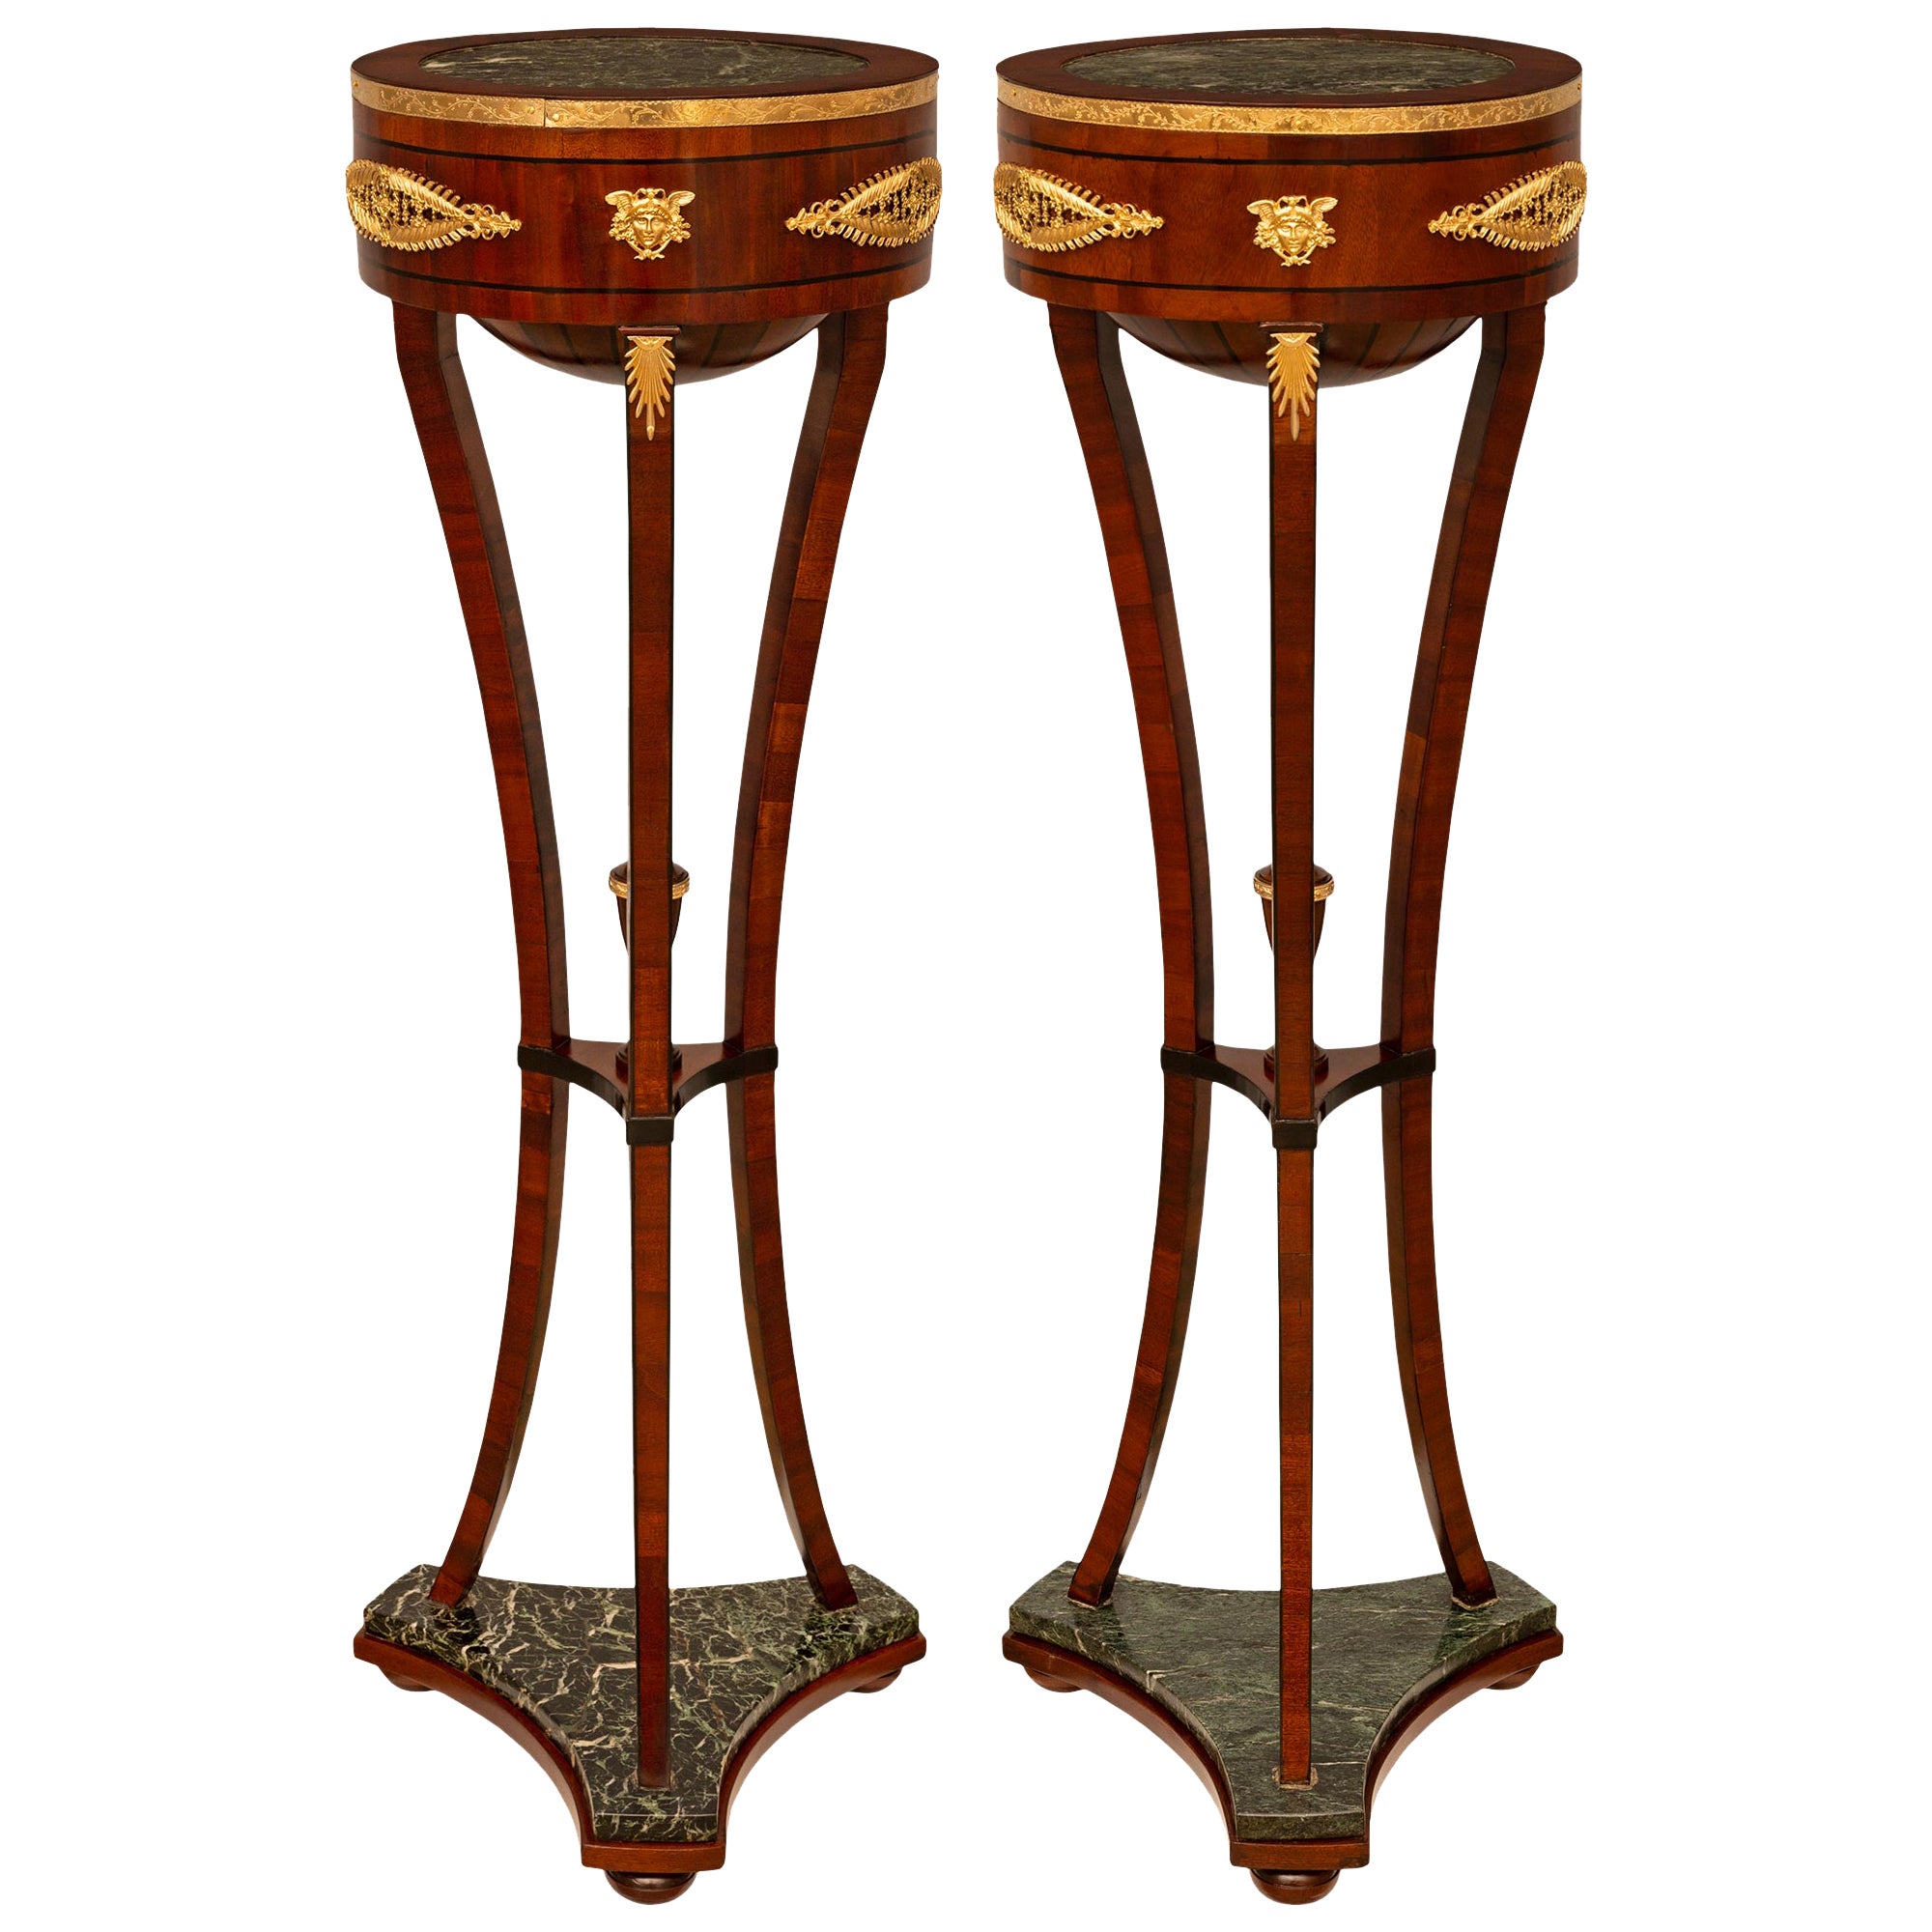 Pair Of Baltic 19th c. Neo-Classical St. Ormolu, Mahogany, And Marble Pedestals